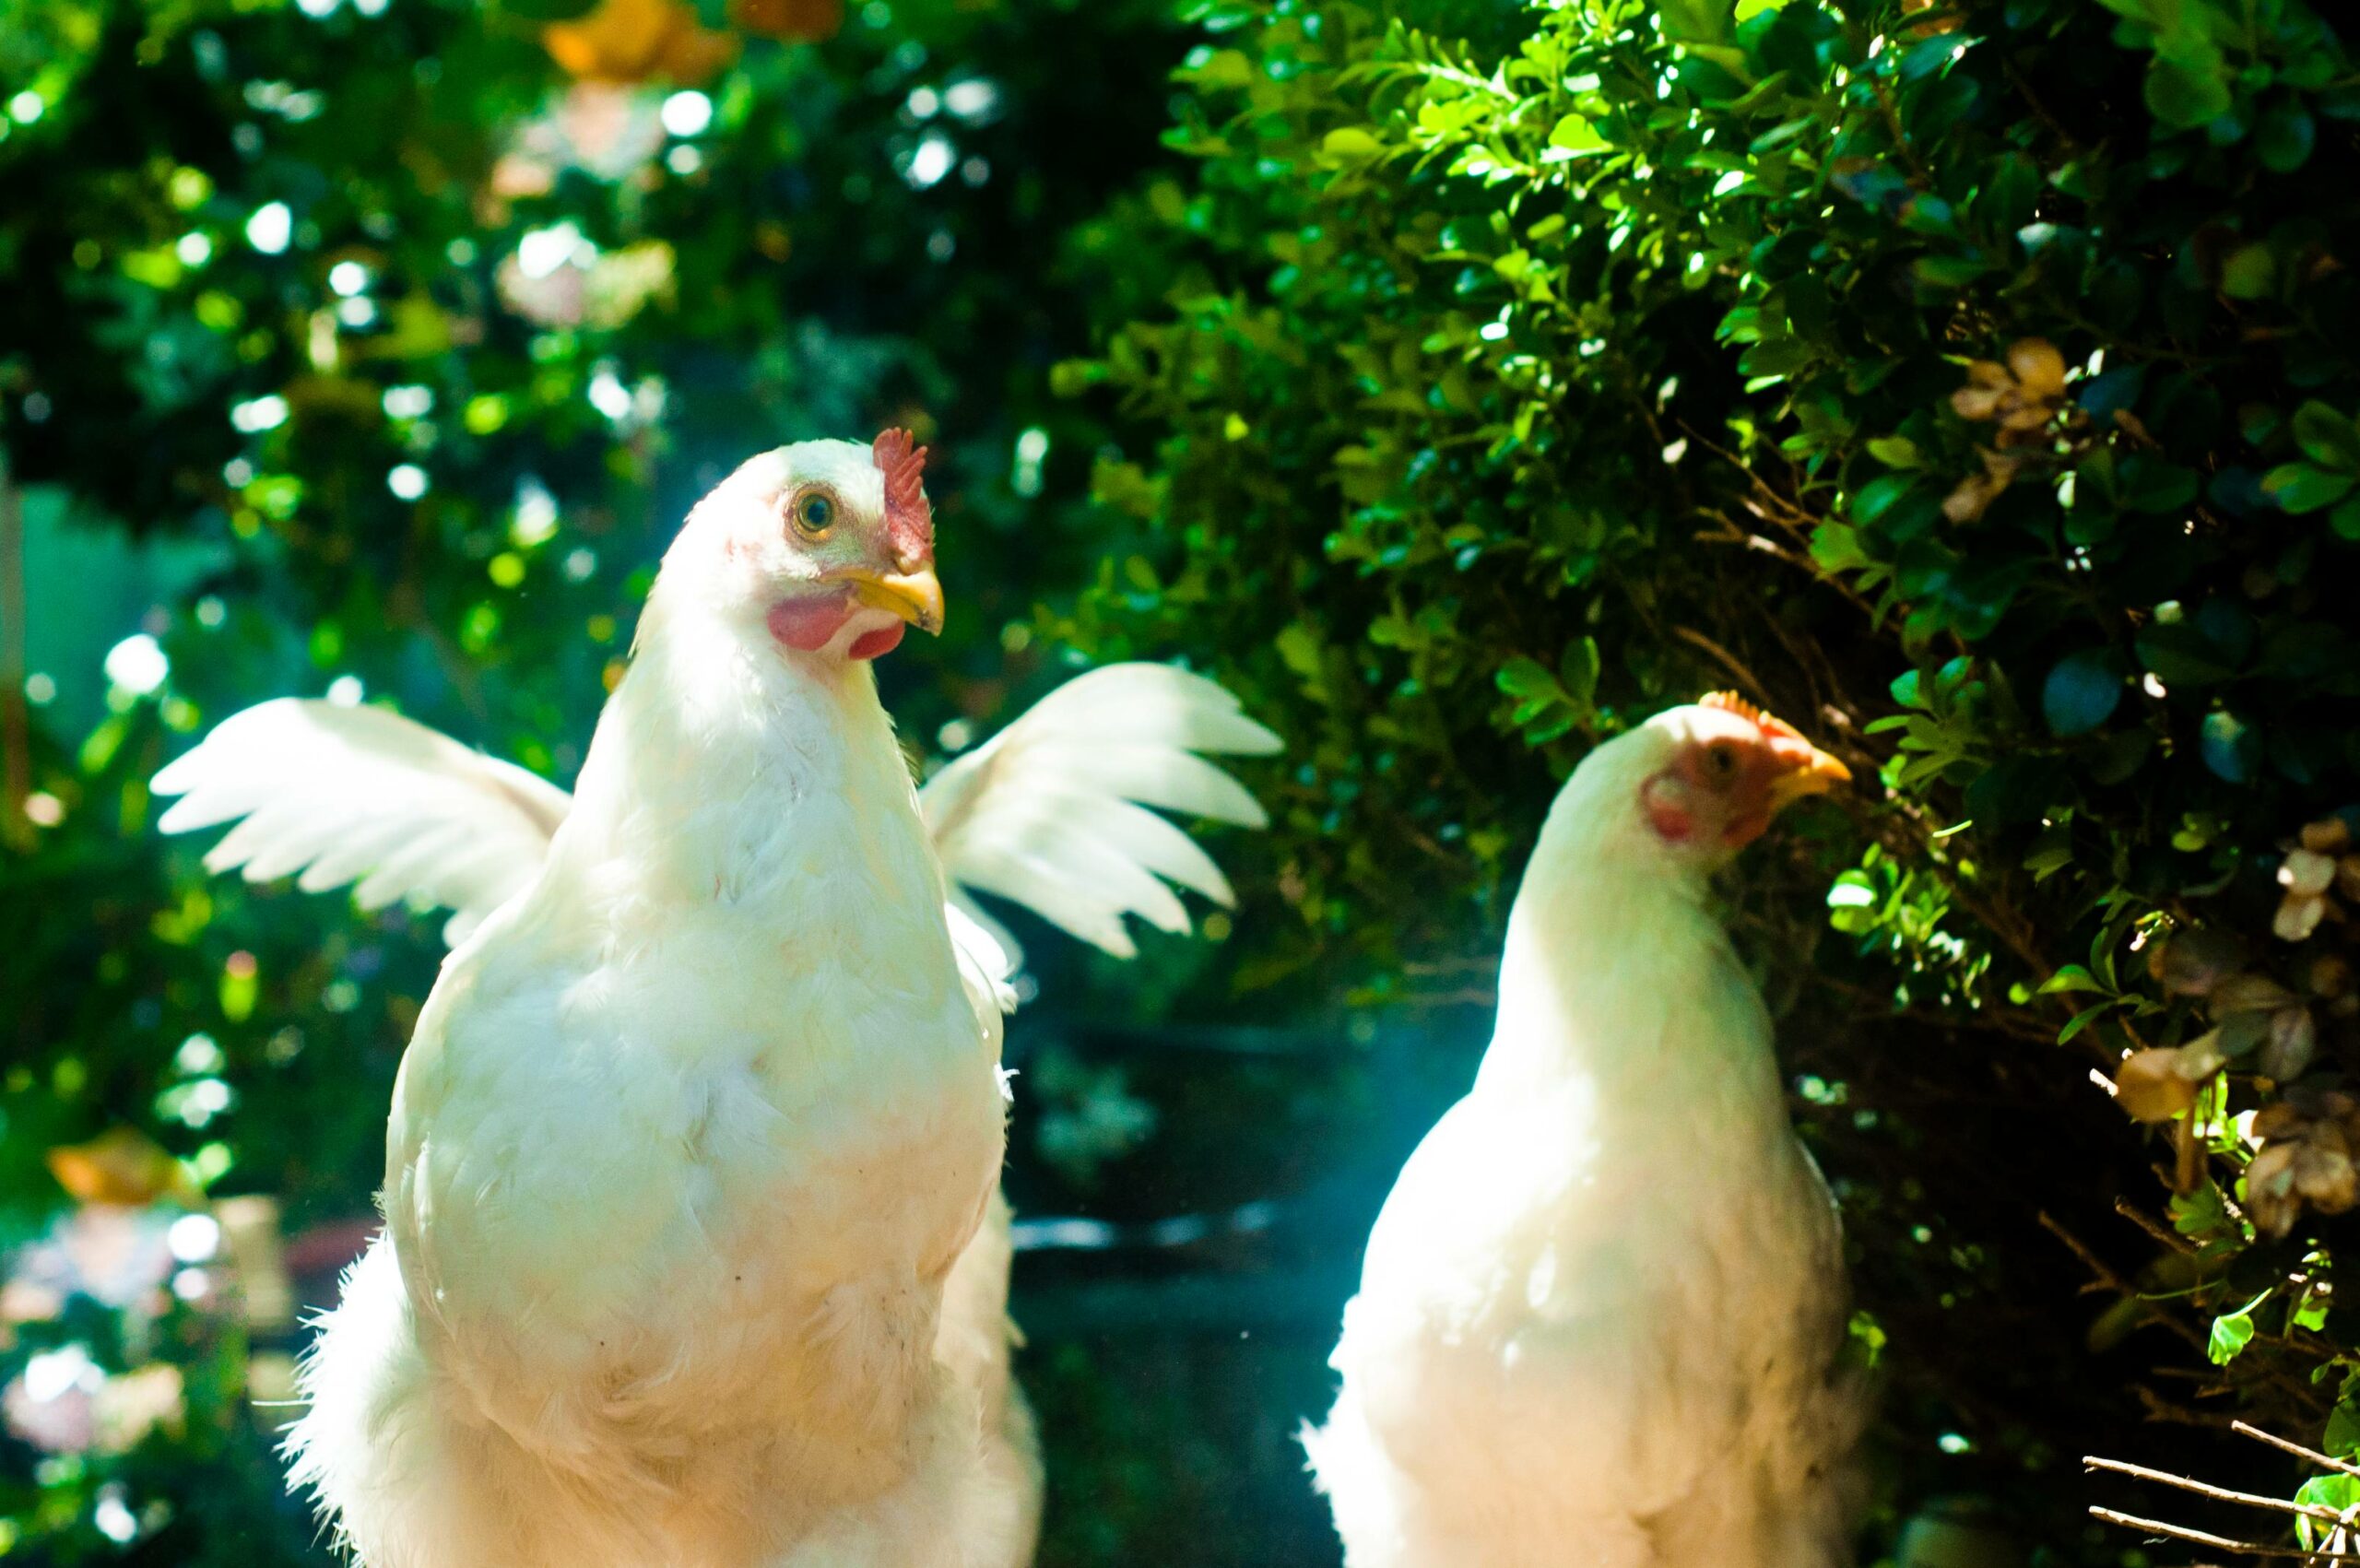 Cage-free chickens keep winding up with broken bones, and scientists are looking for a solution